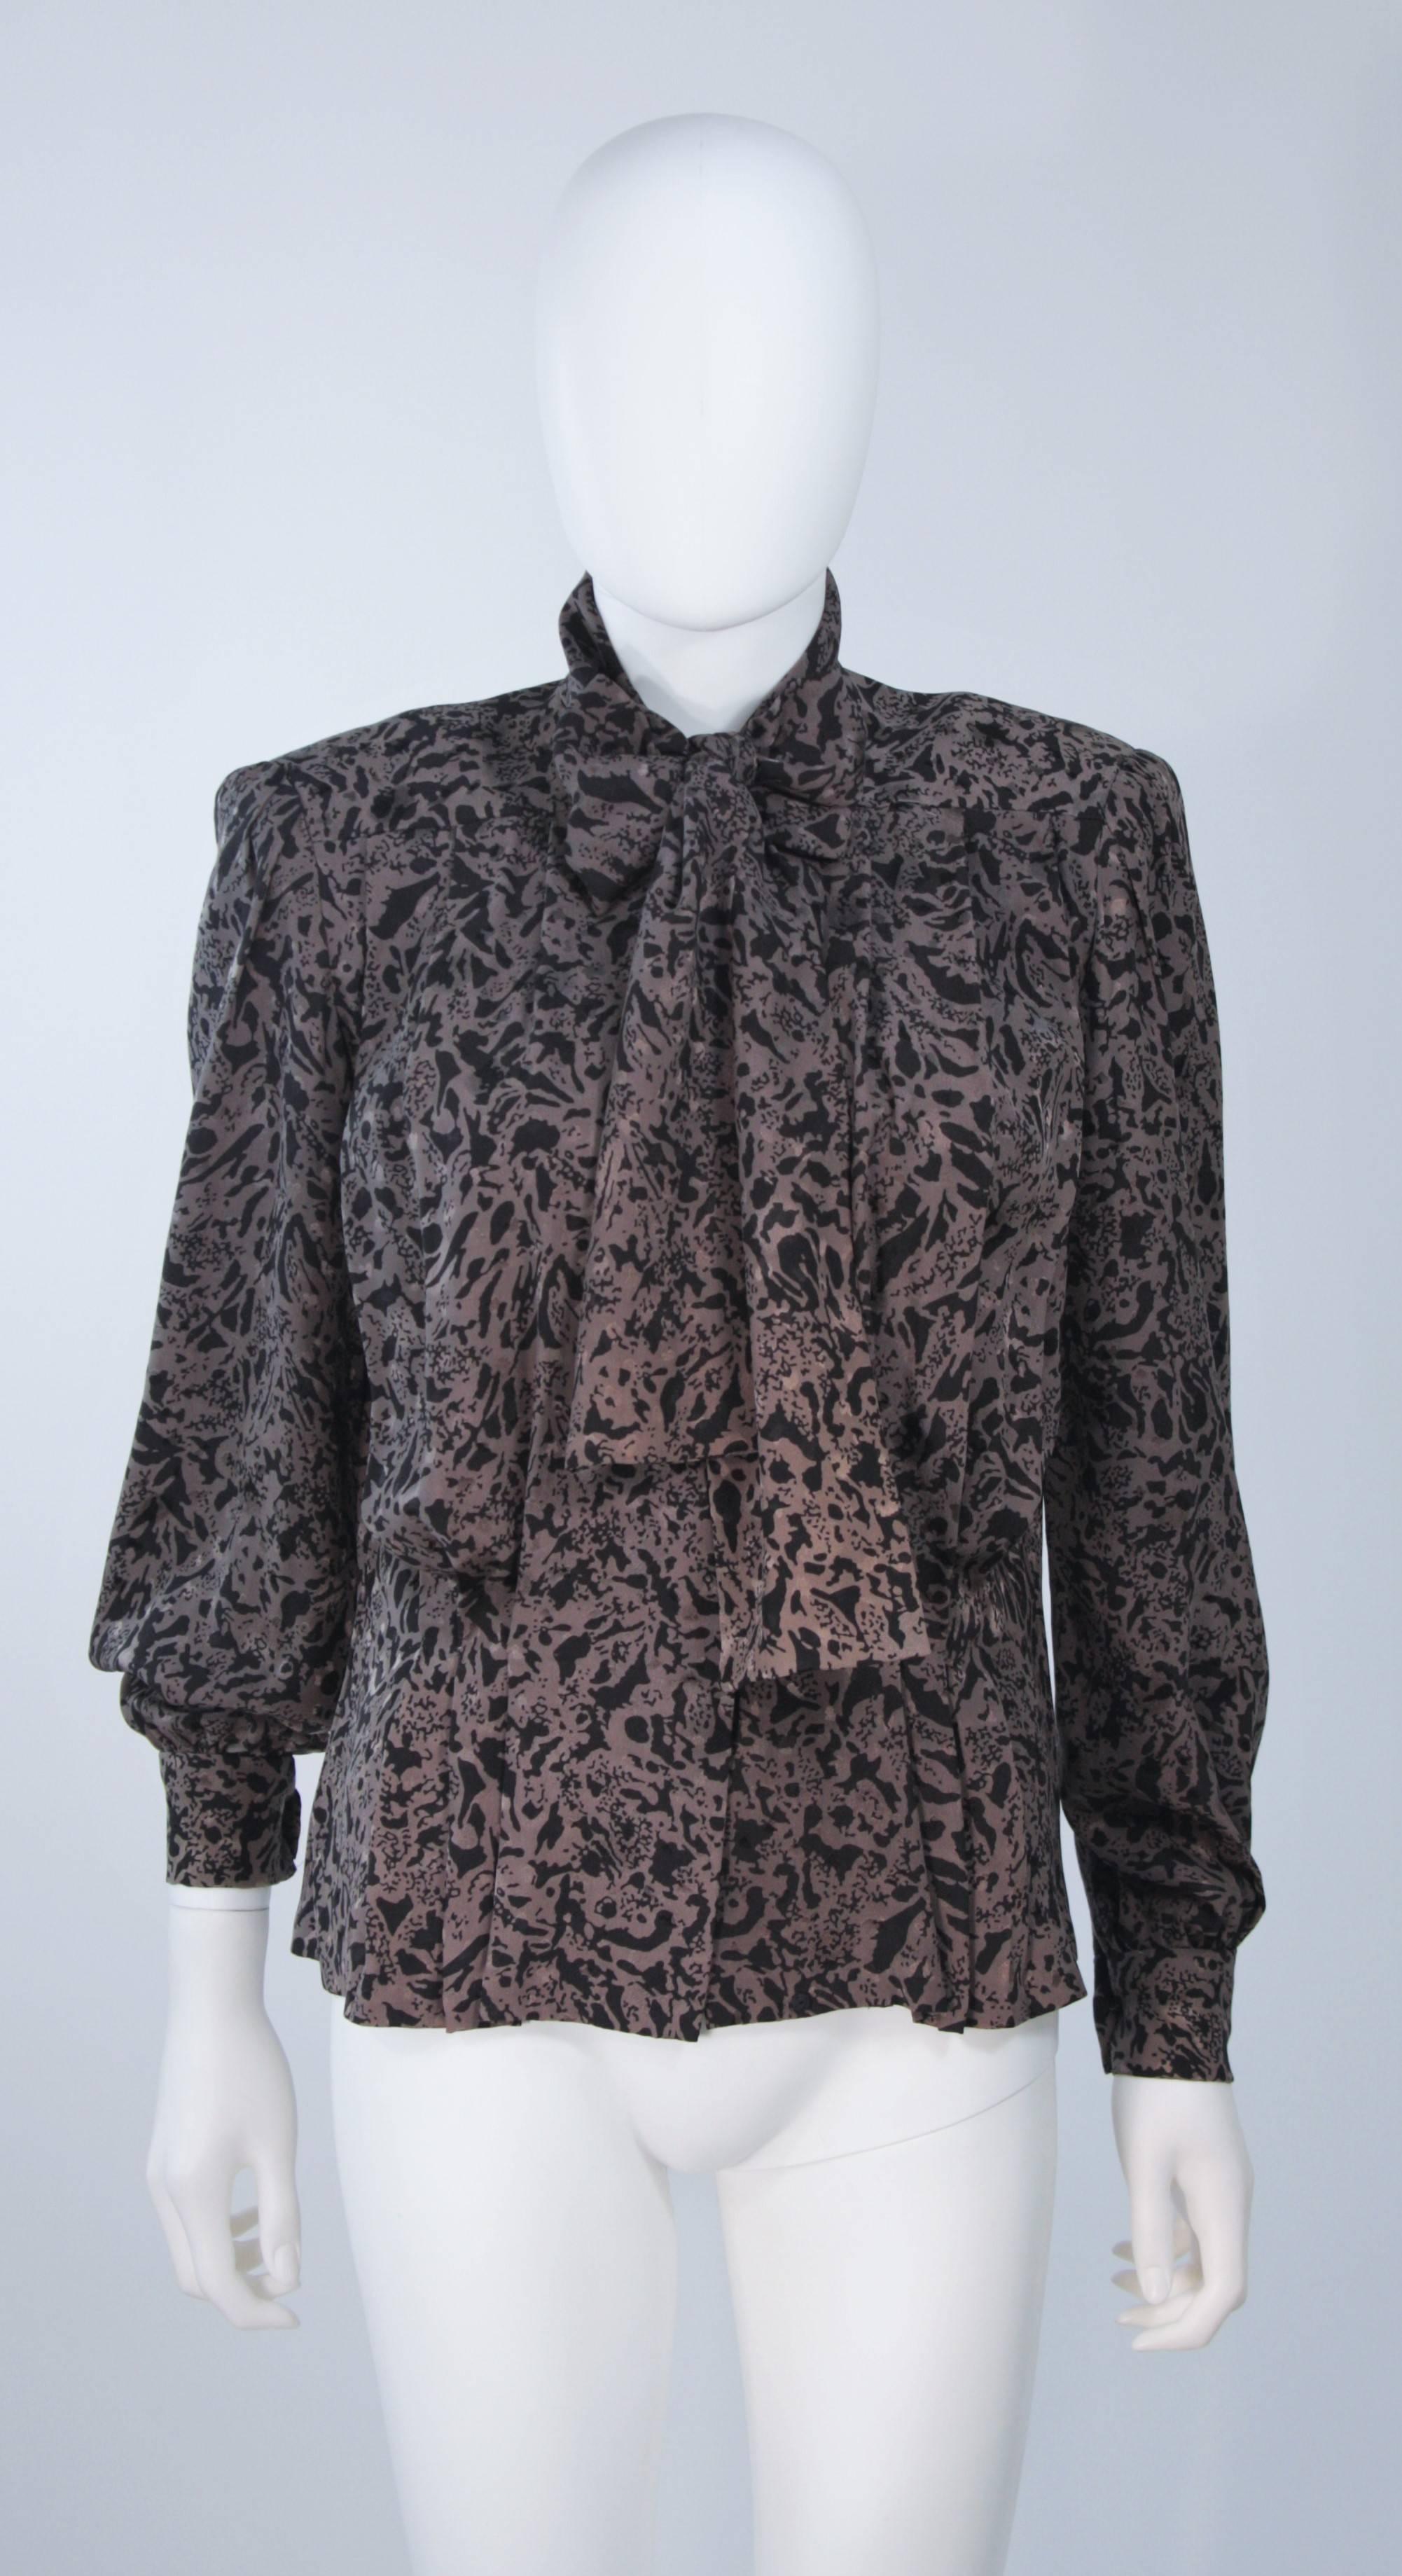 GIVENCHY COUTURE Wool Silk & Snakeskin 4pc Skirt Suit with Belt Size 4-6 2